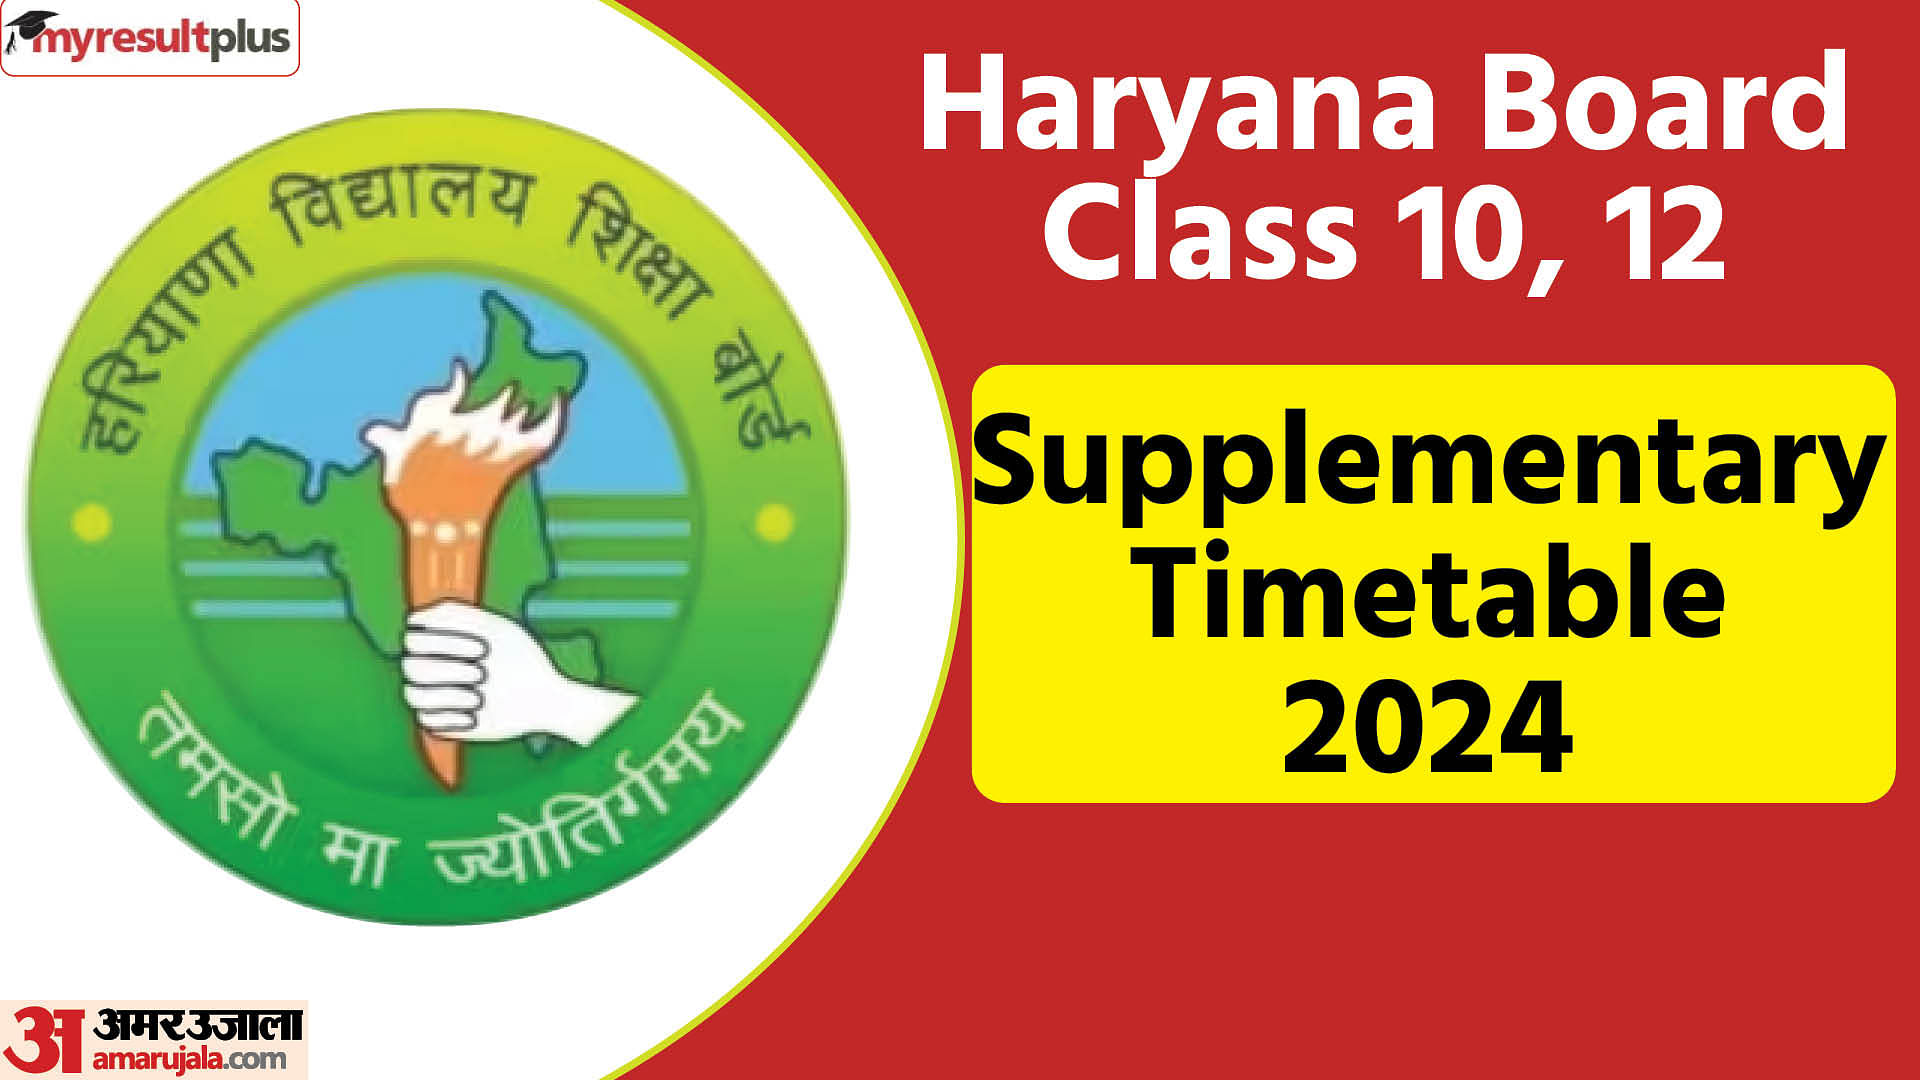 Haryana Board Class 10, 12 Supplementary Timetable 2024, Released, Check the exam schedule here